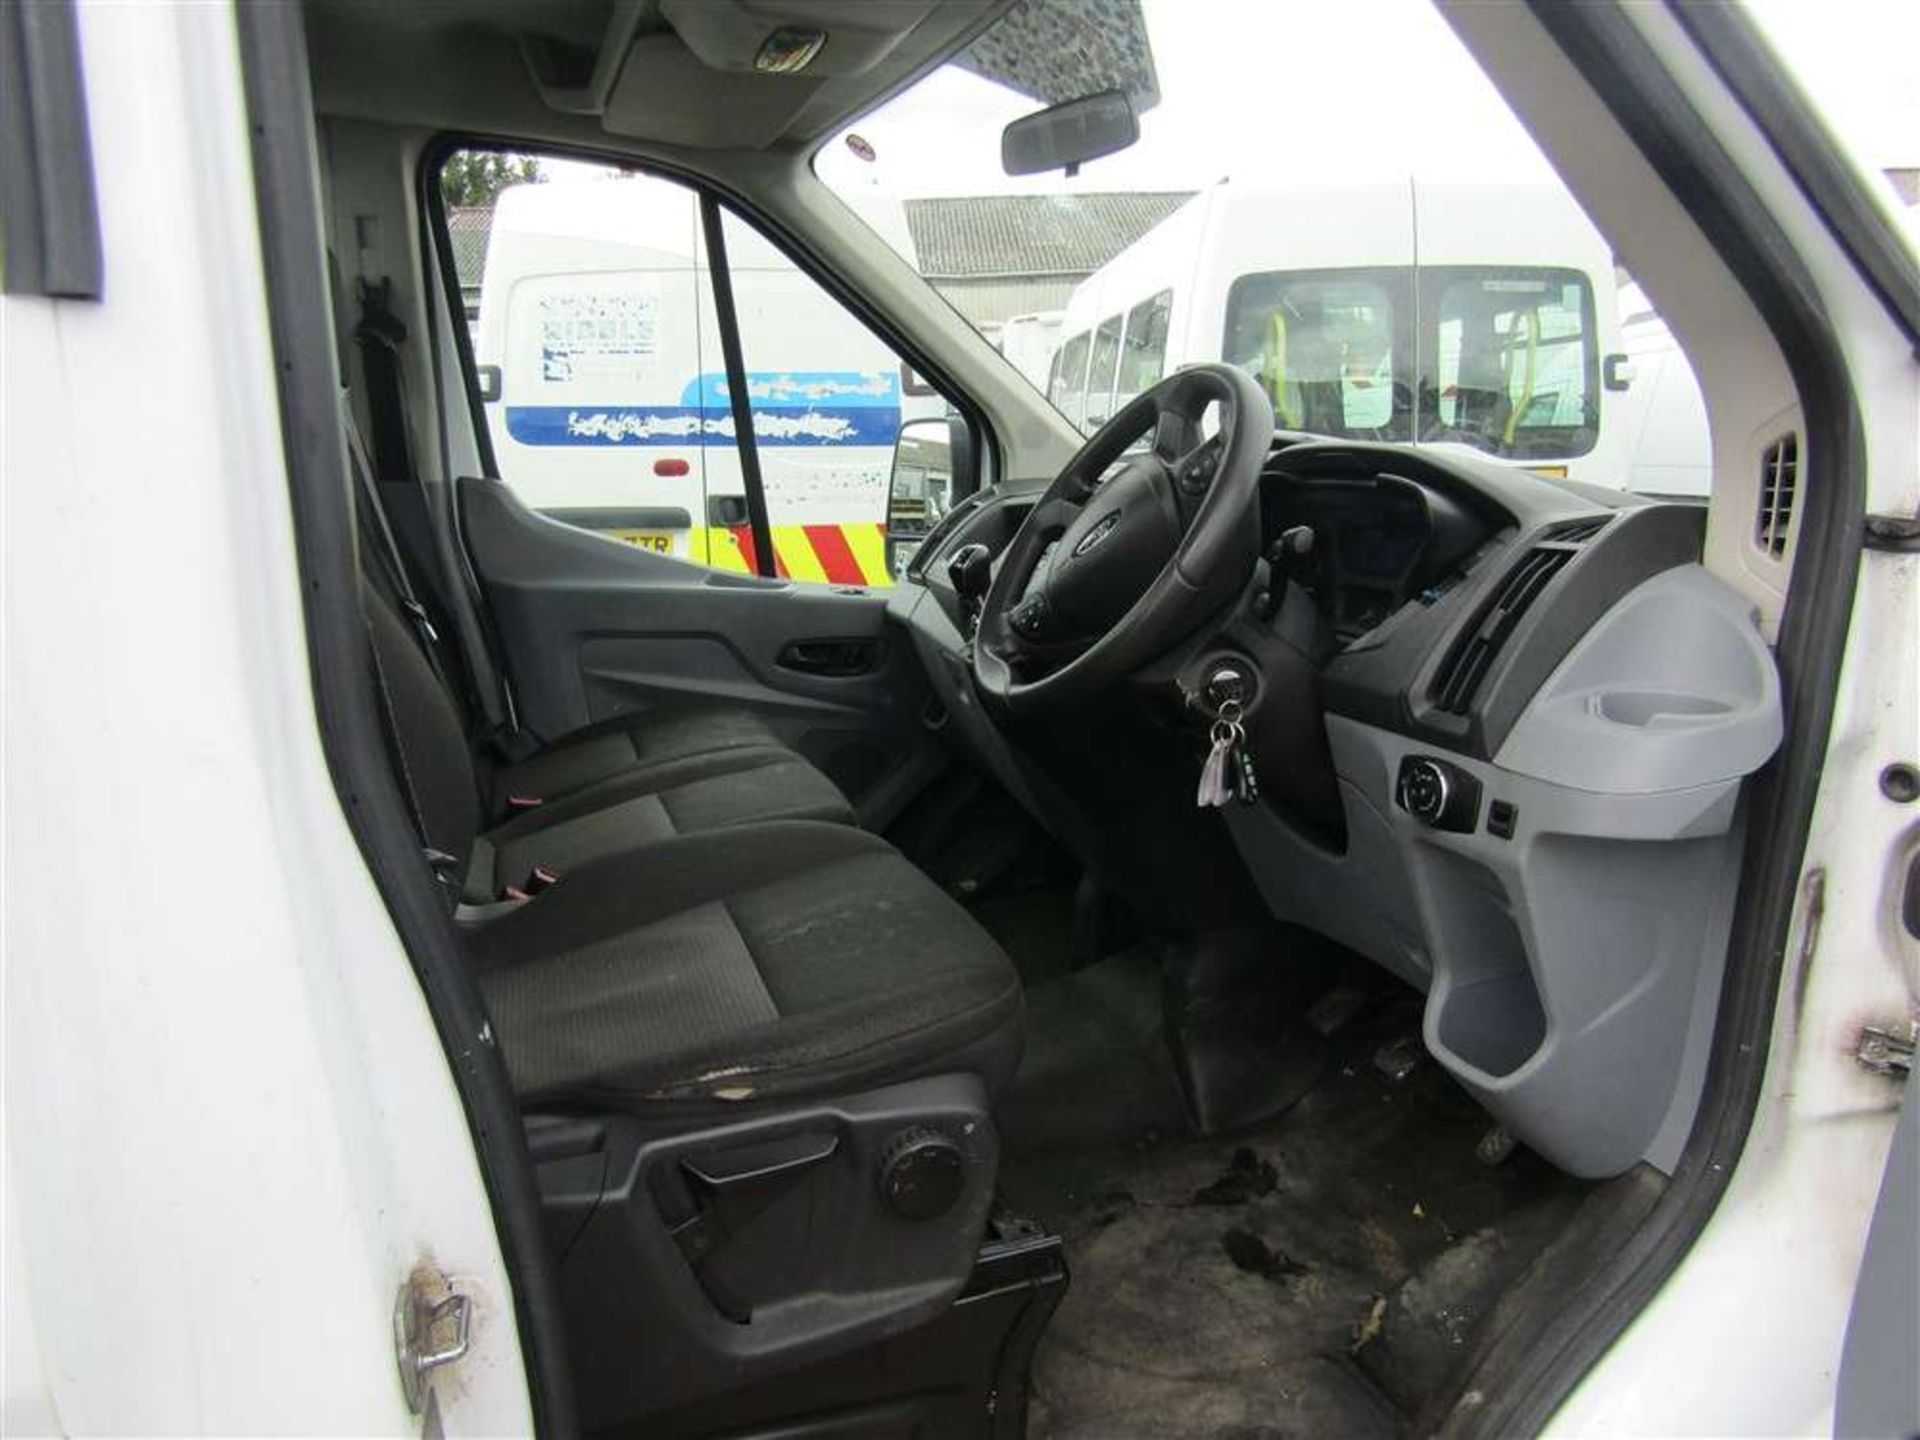 2015 15 reg Ford Transit 350 Tipper (Direct Council) - Image 6 of 7